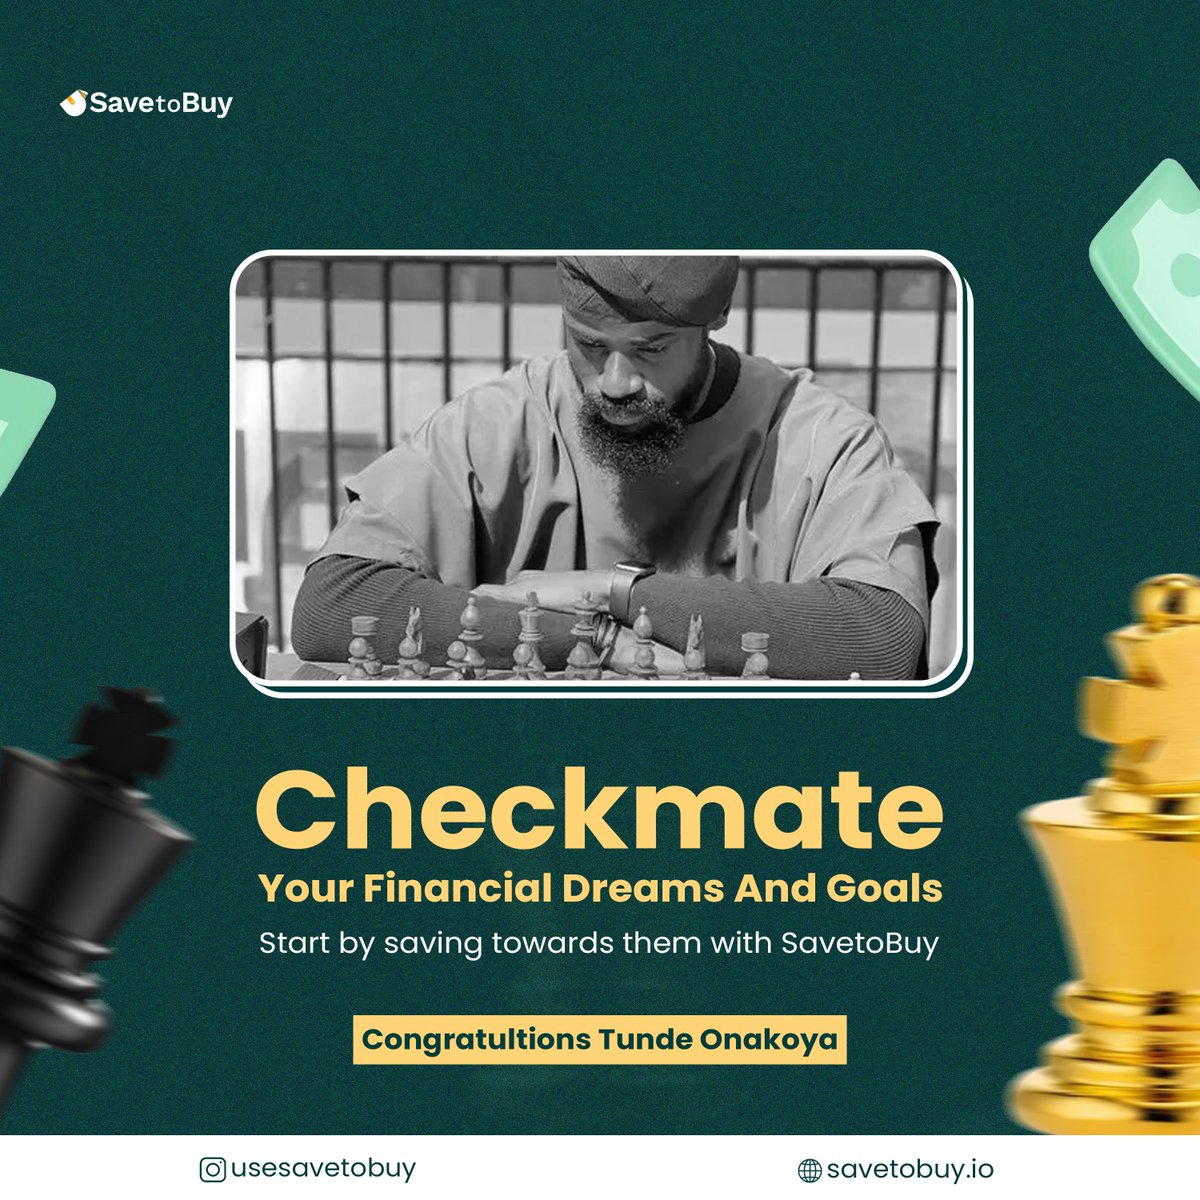 Chess moves and financial gains go hand in hand, just like Tunde’s strategic brilliance on the board. Every move counts, whether in chess or saving for your future. 
#ChessMaster #FinancialPlanning
#ChessMarathon
#TundeOnakoya
#savetobuy